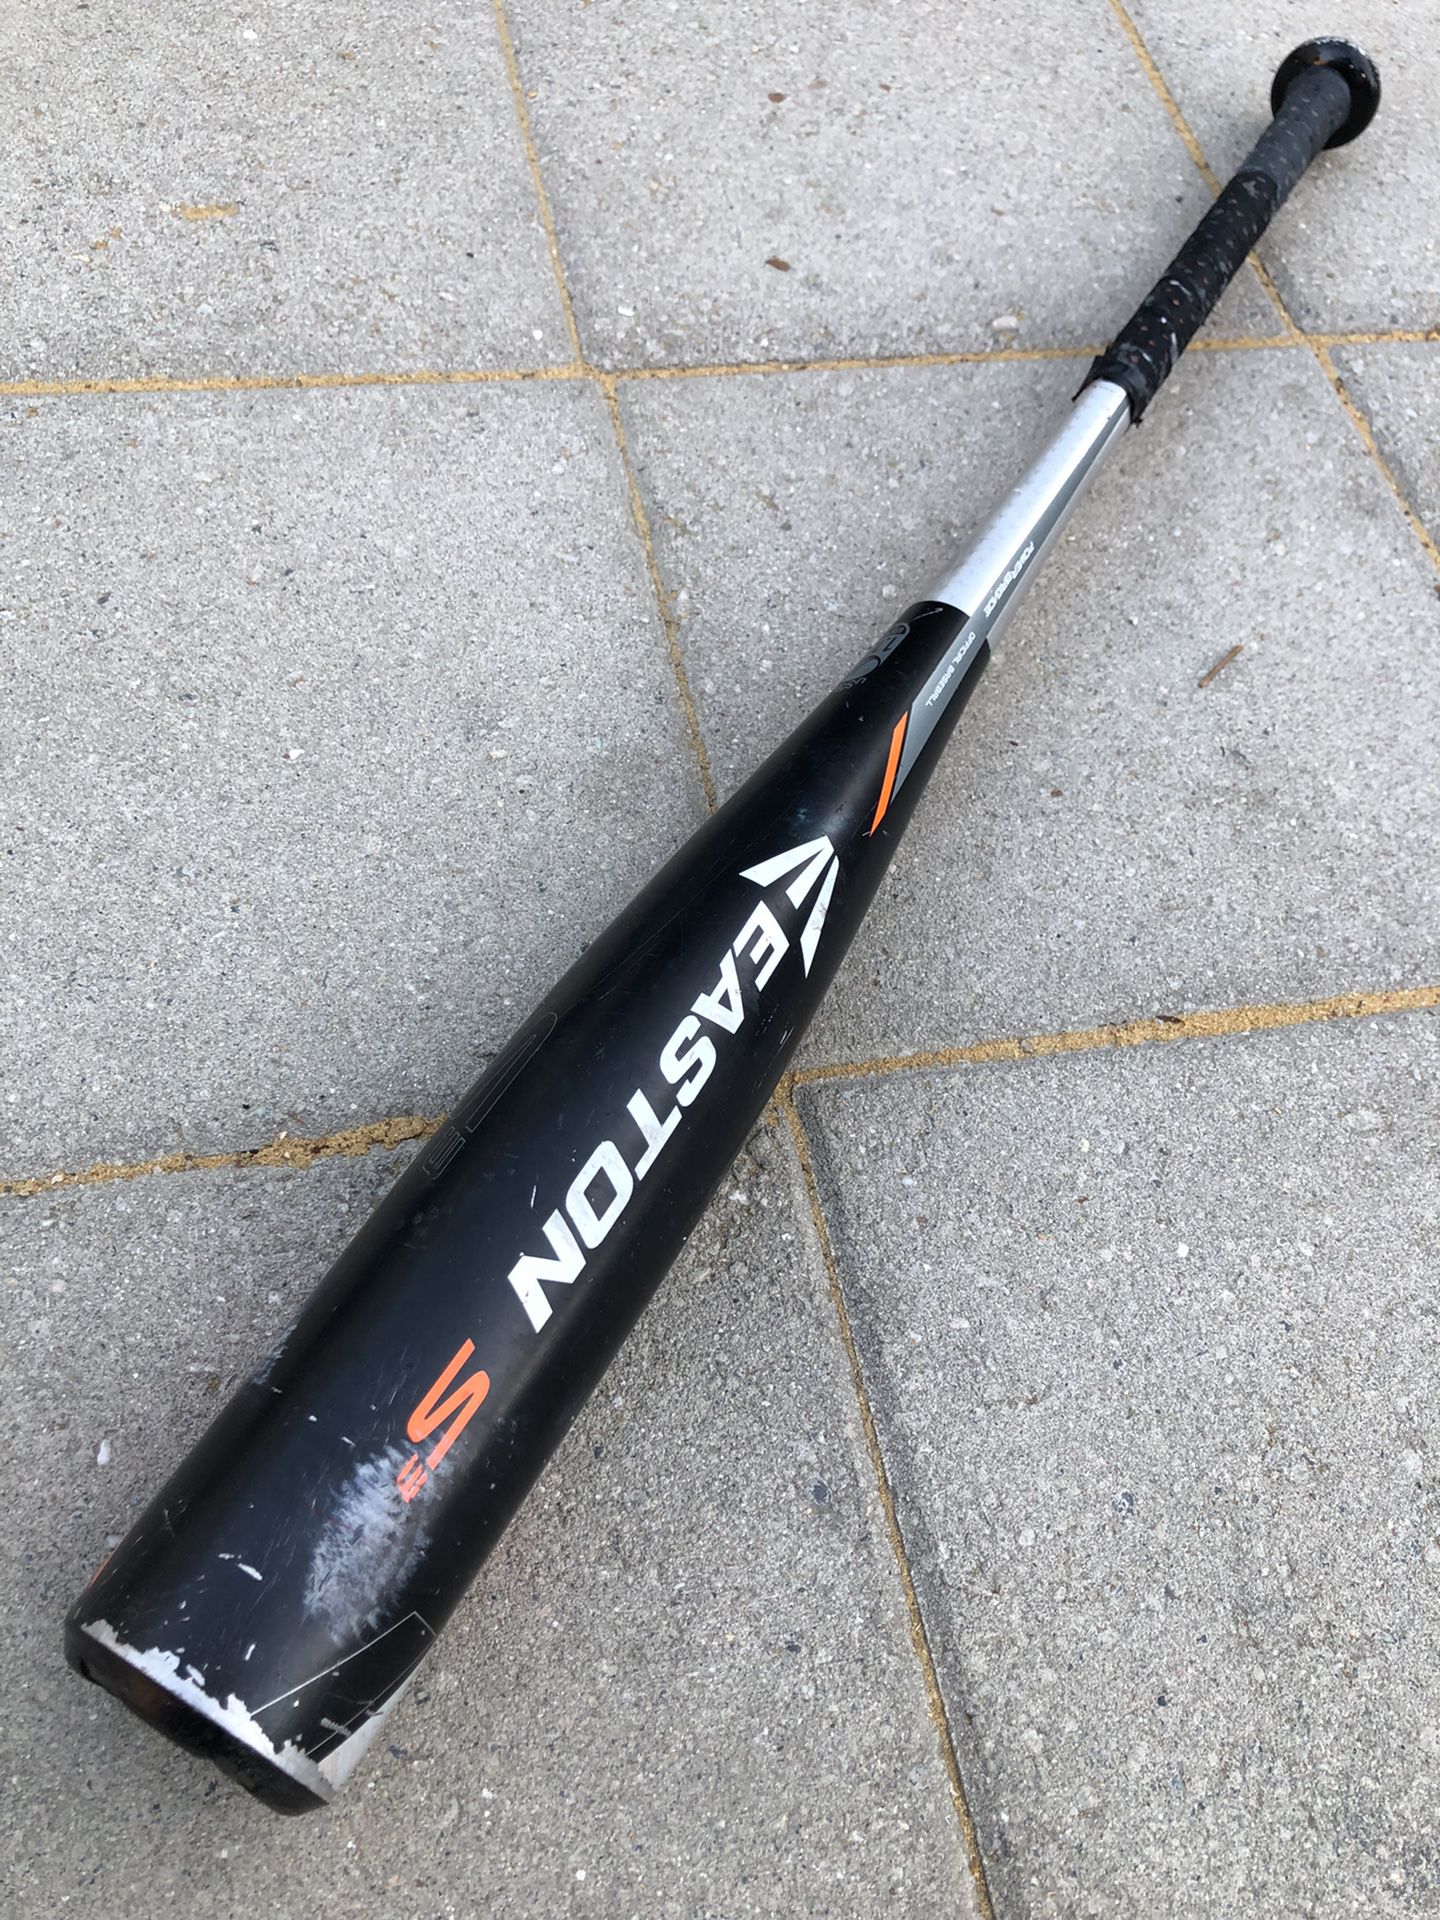 Easton S1 baseball bat Sz 30in 20oz. $40 FIRM! Also have other baseball equipment on my profile !